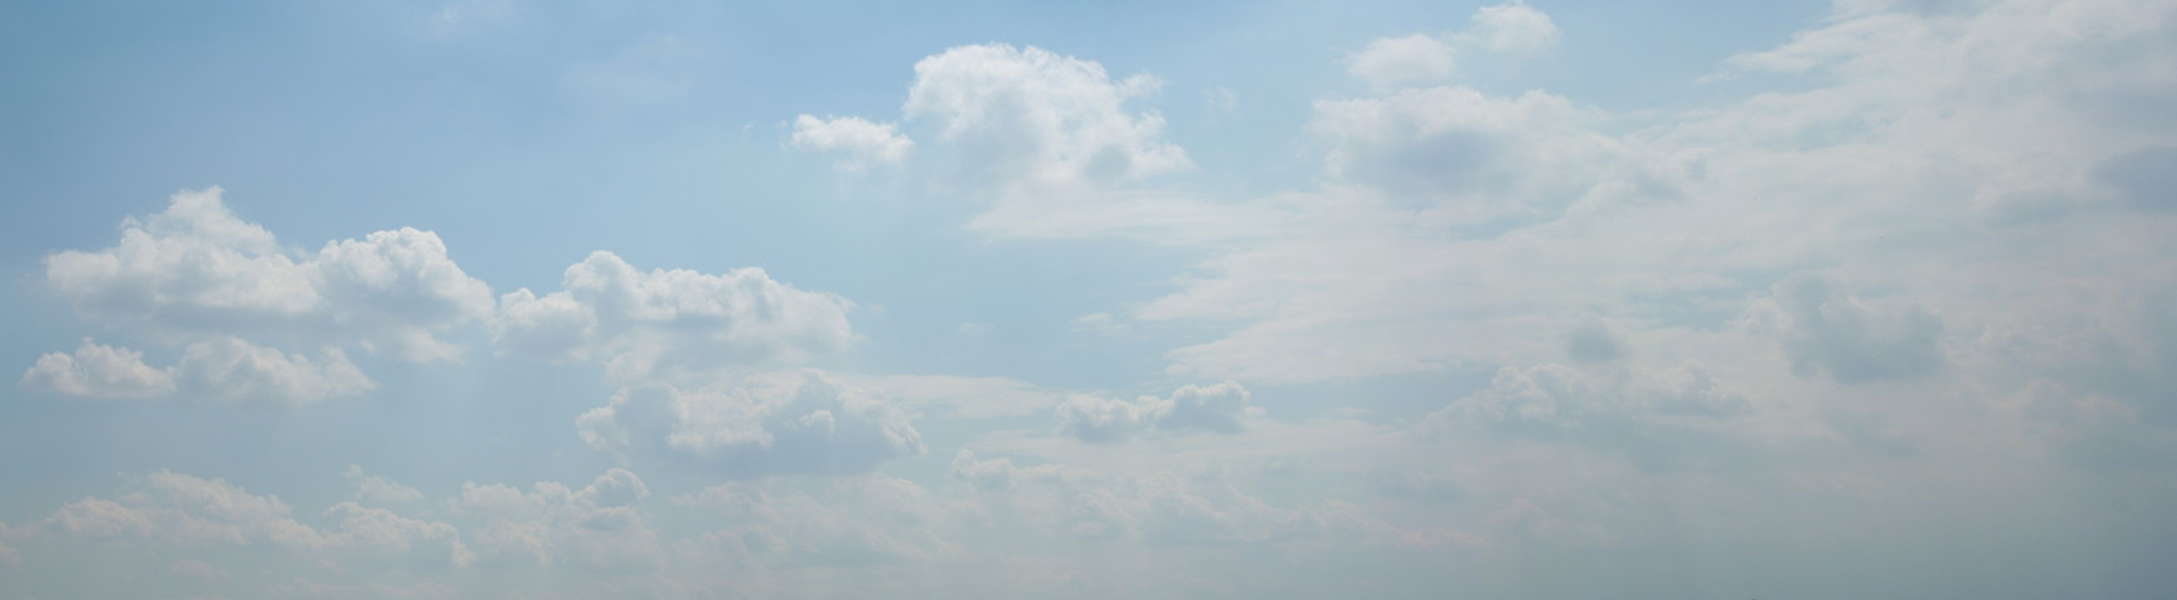 Skies0306 - Free Background Texture - sky clouds blue white light